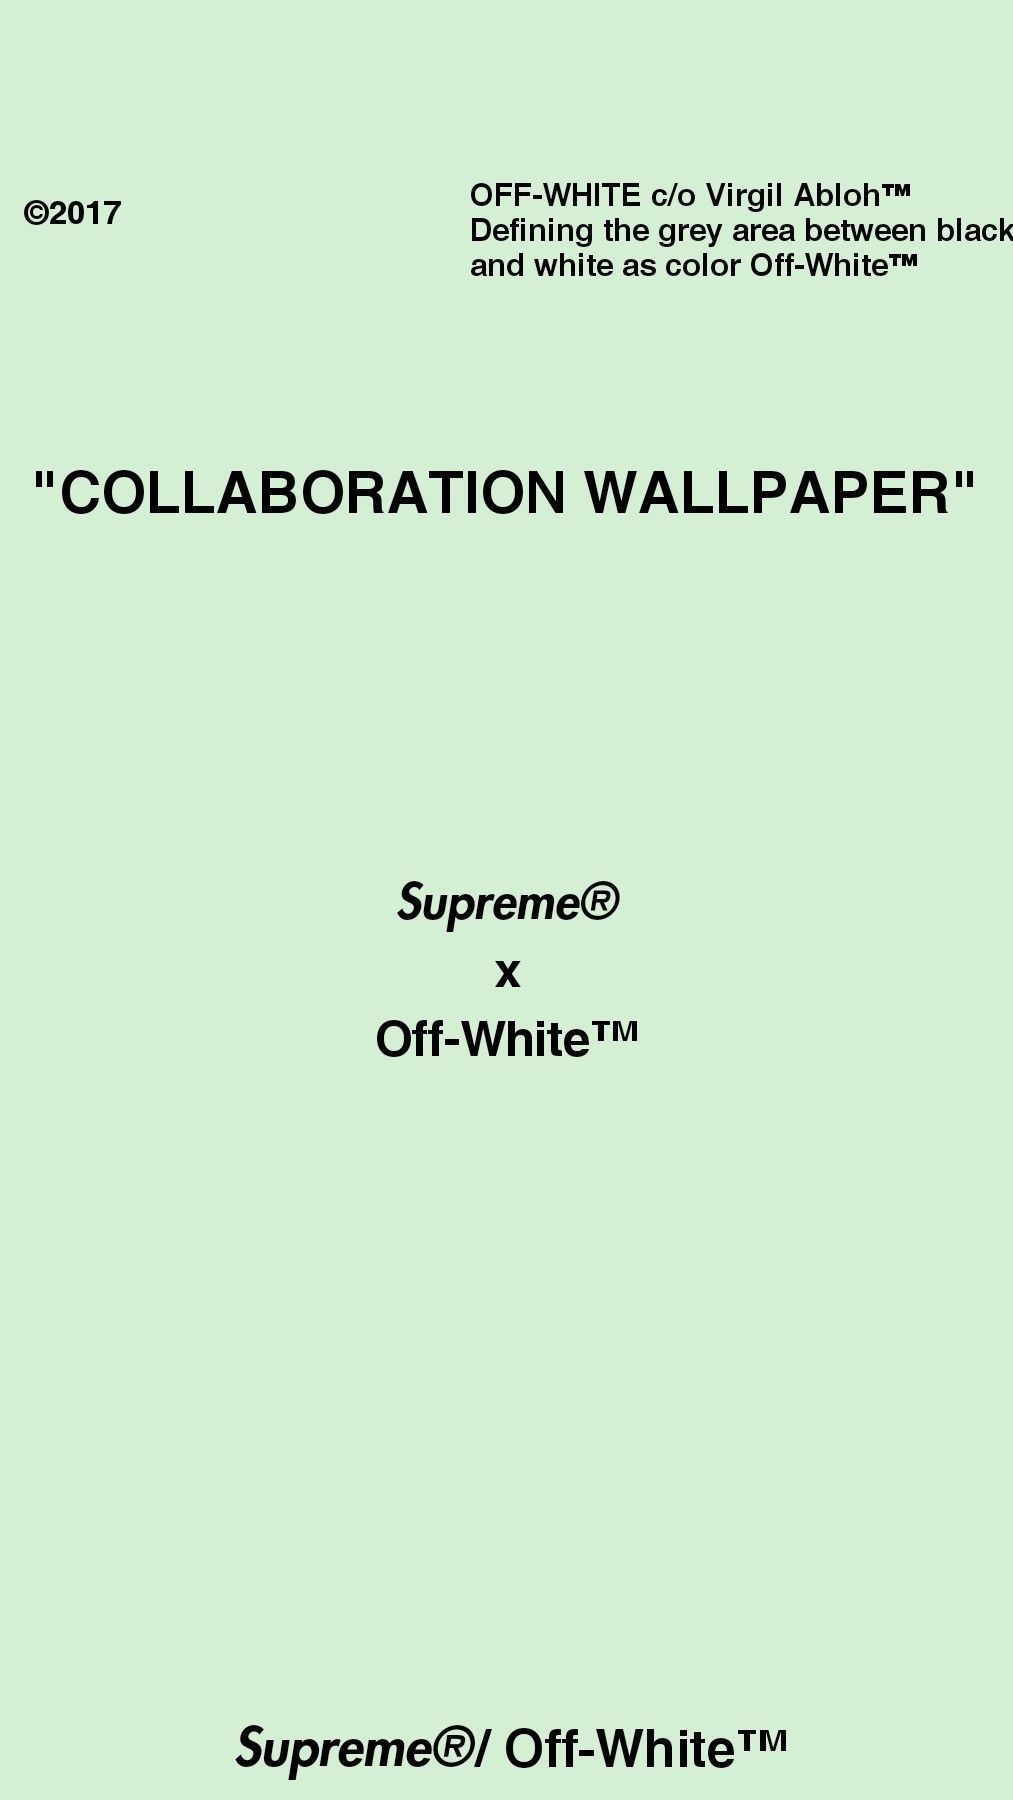 Wallpaper for Samsung S8, Virgil Abloh style  Learn photo editing, Hype  wallpaper, Iphone wallpaper off white